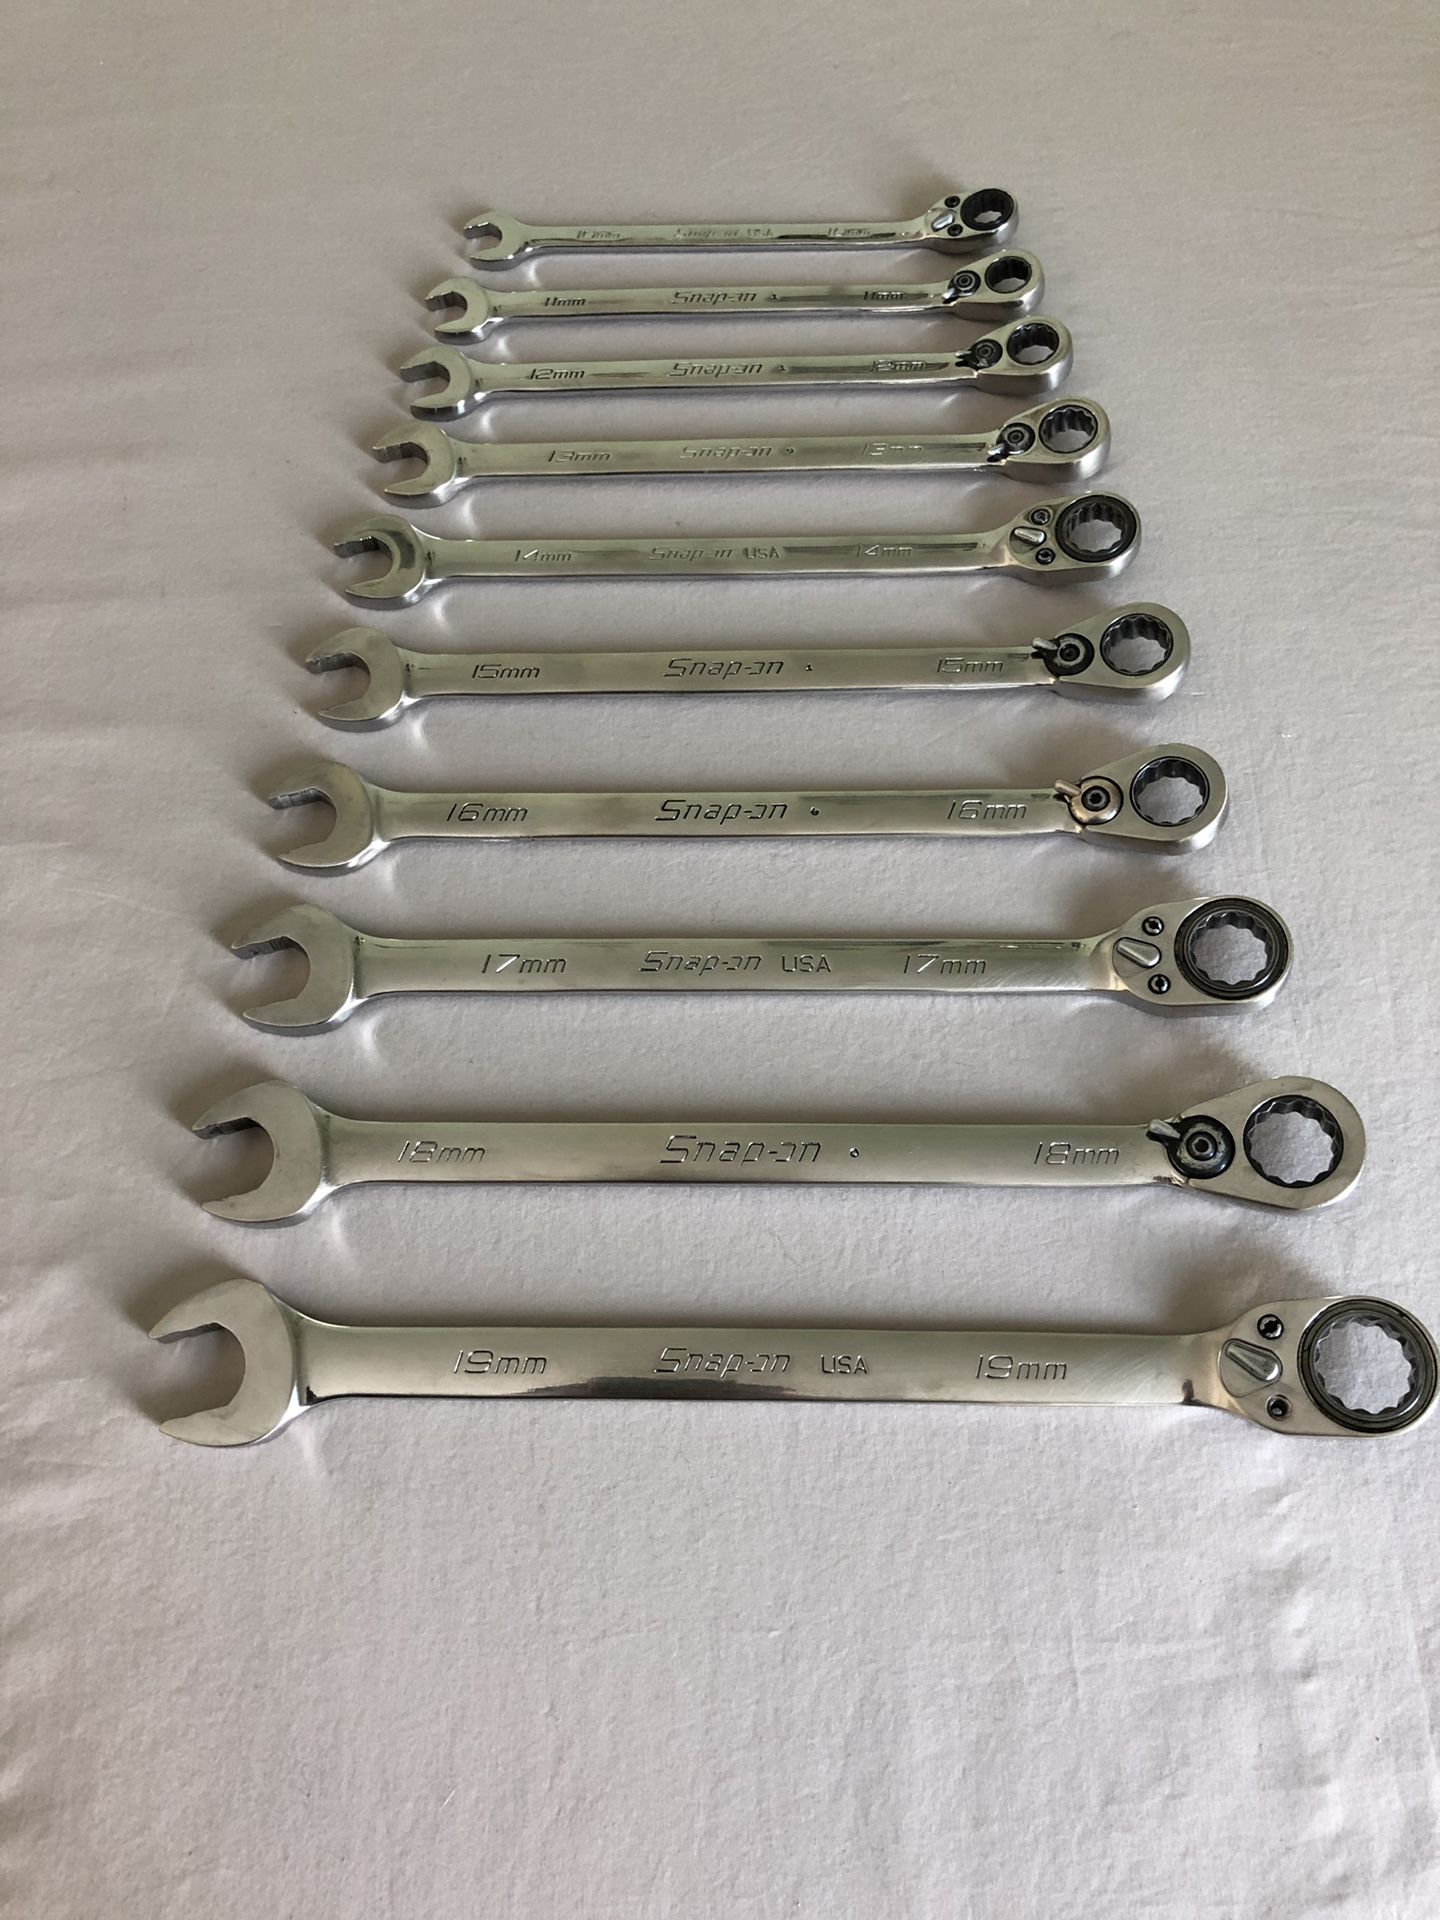 Snap on 10-19 millimeter wrench ratchet set. Not engraved! Very clean